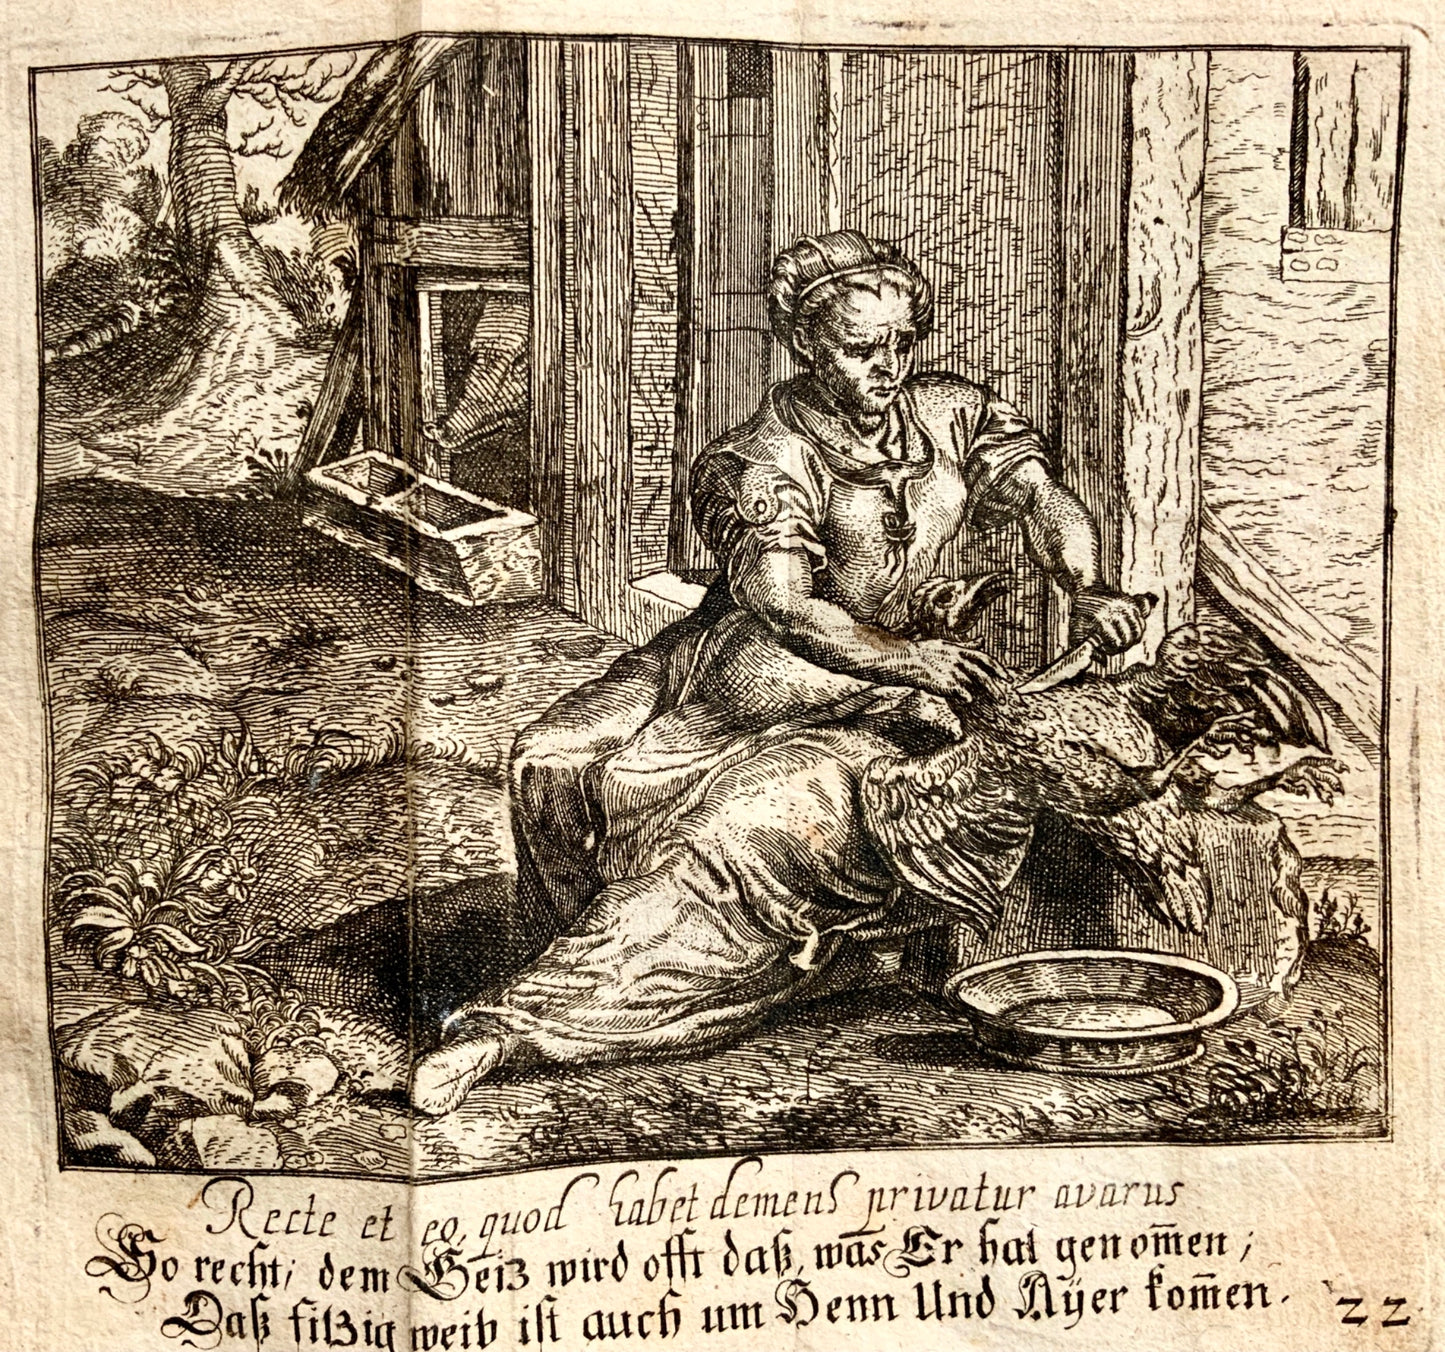 1689 Christoph Schmidts Emblematic engraving Farmer Preparing a Chicken - Food, Agriculture